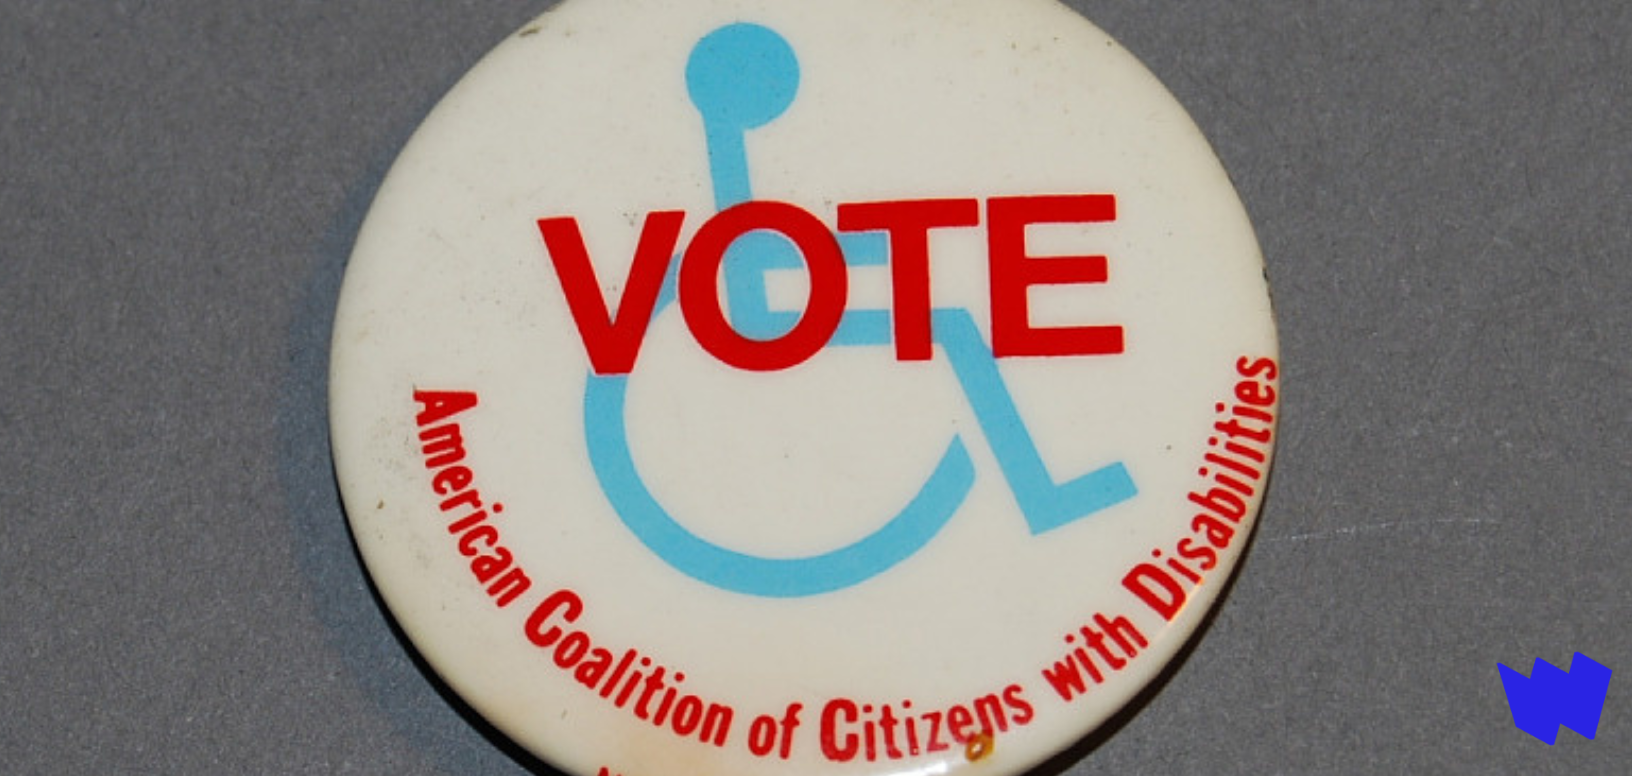 Pin-backed button that says "Vote" over graphic of person in wheelchair. Bottom text says "American Coalition of Citizens with Disabilities."